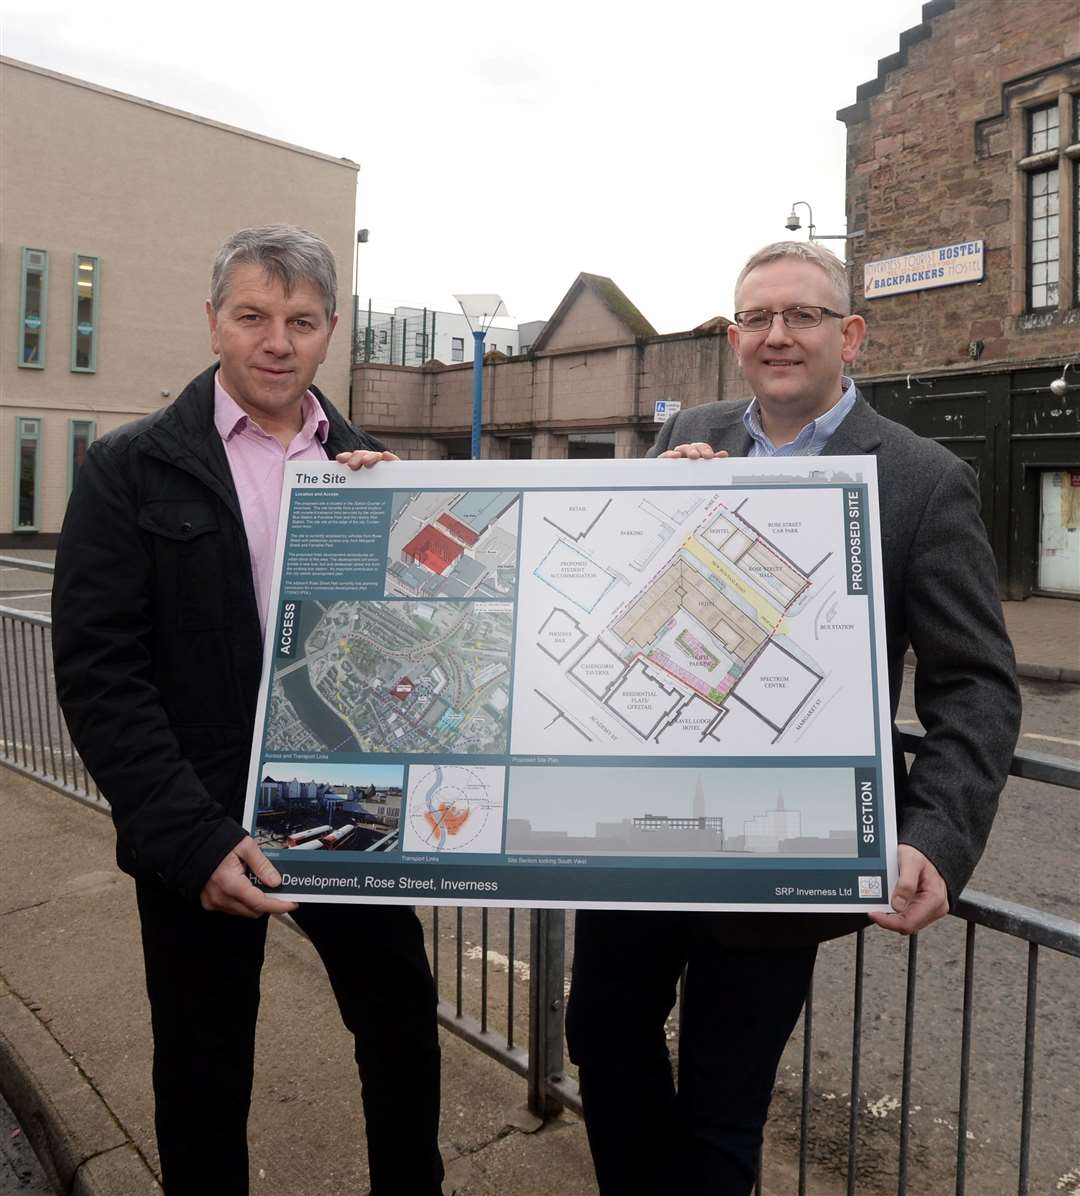 Directors of SRP Inverness Ltd Stuart McCaffer and Stewart Campbell with plans for the proposed new hotel.